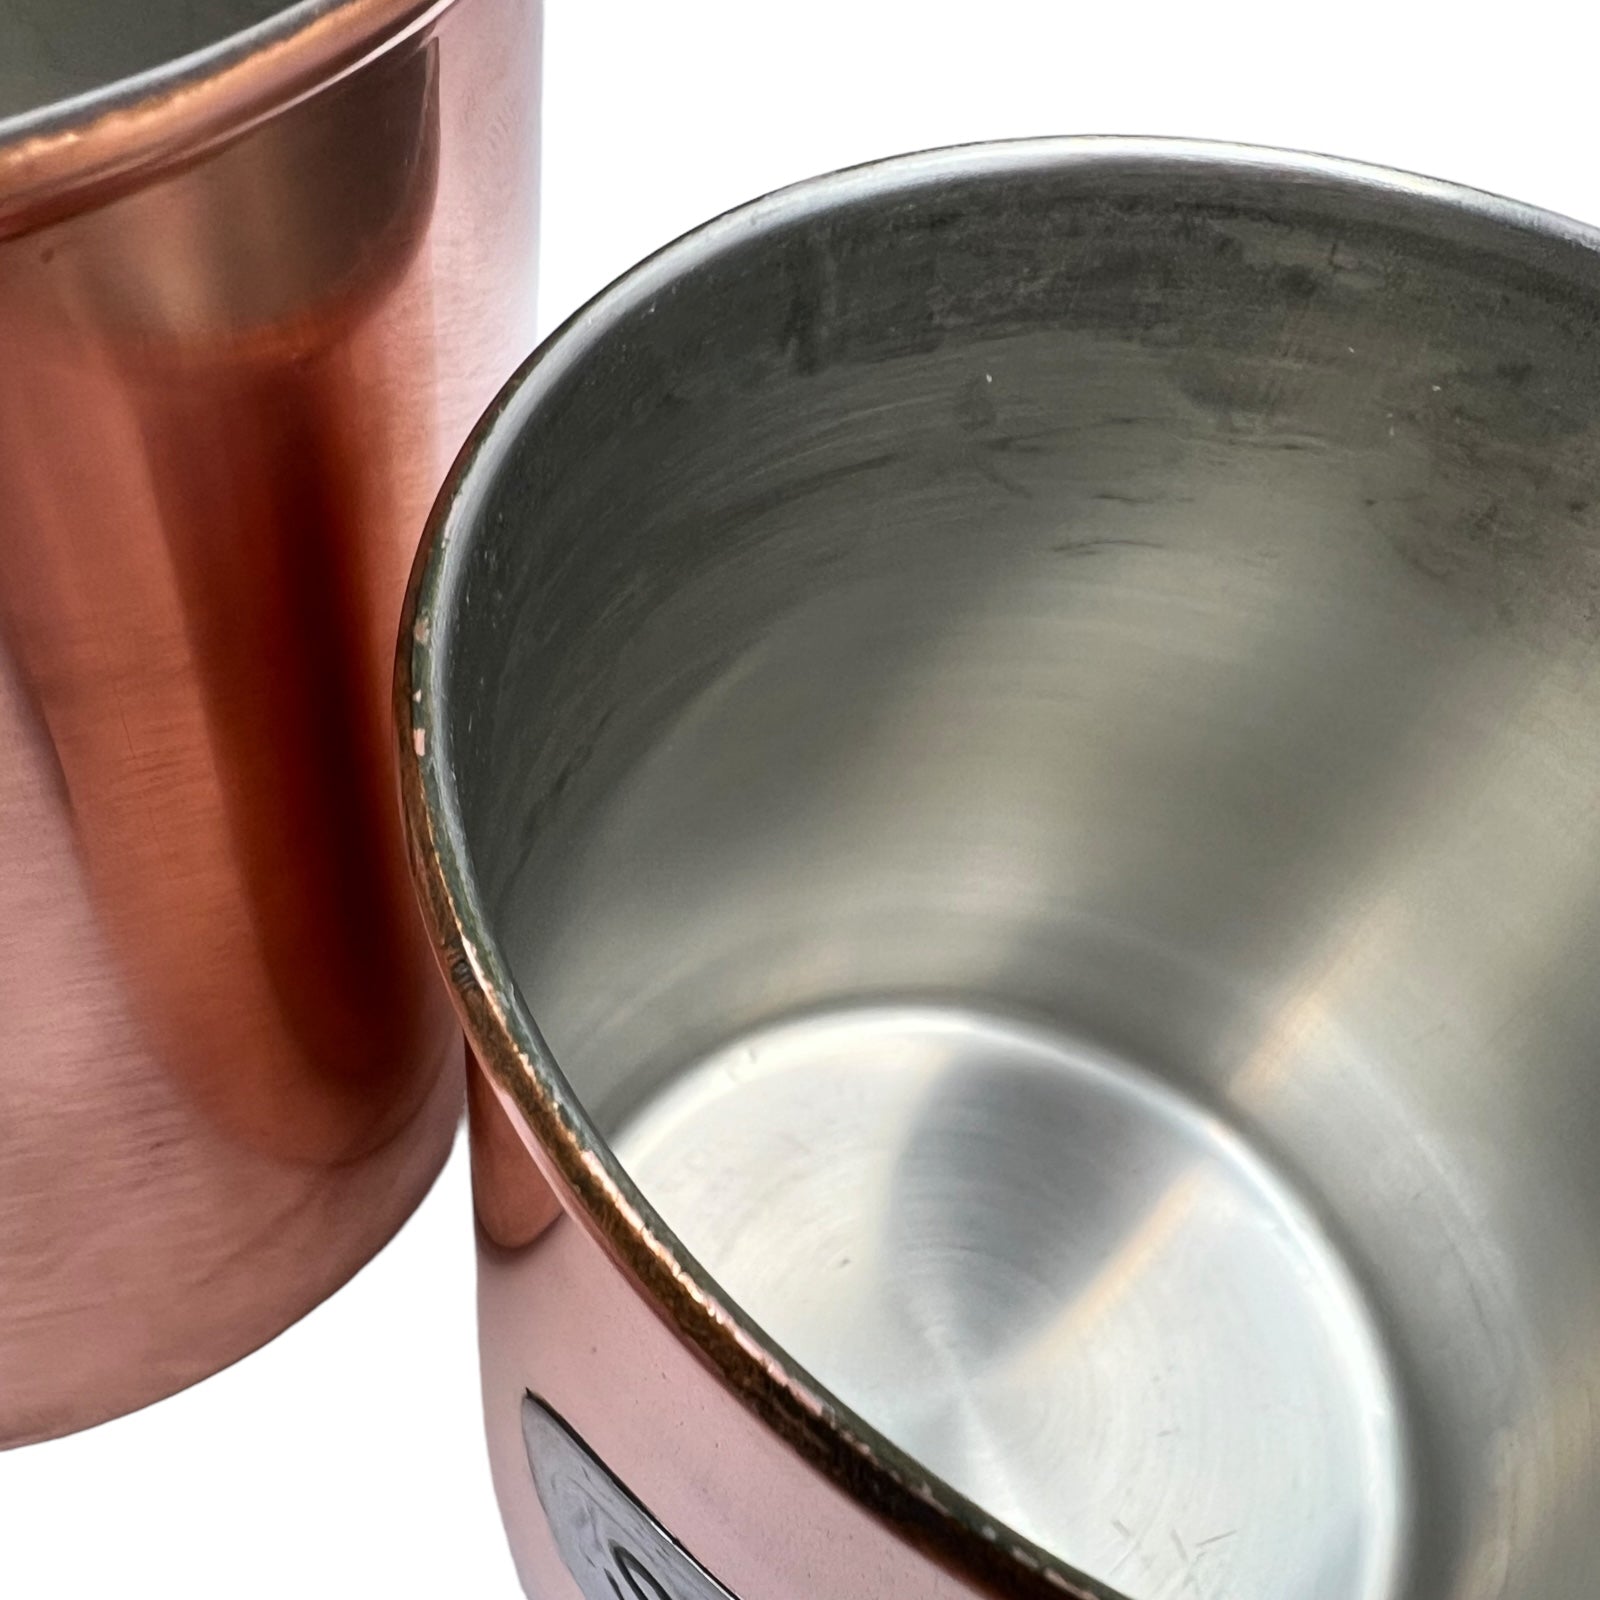 Set of 4 copper kitchen canisters caddies 